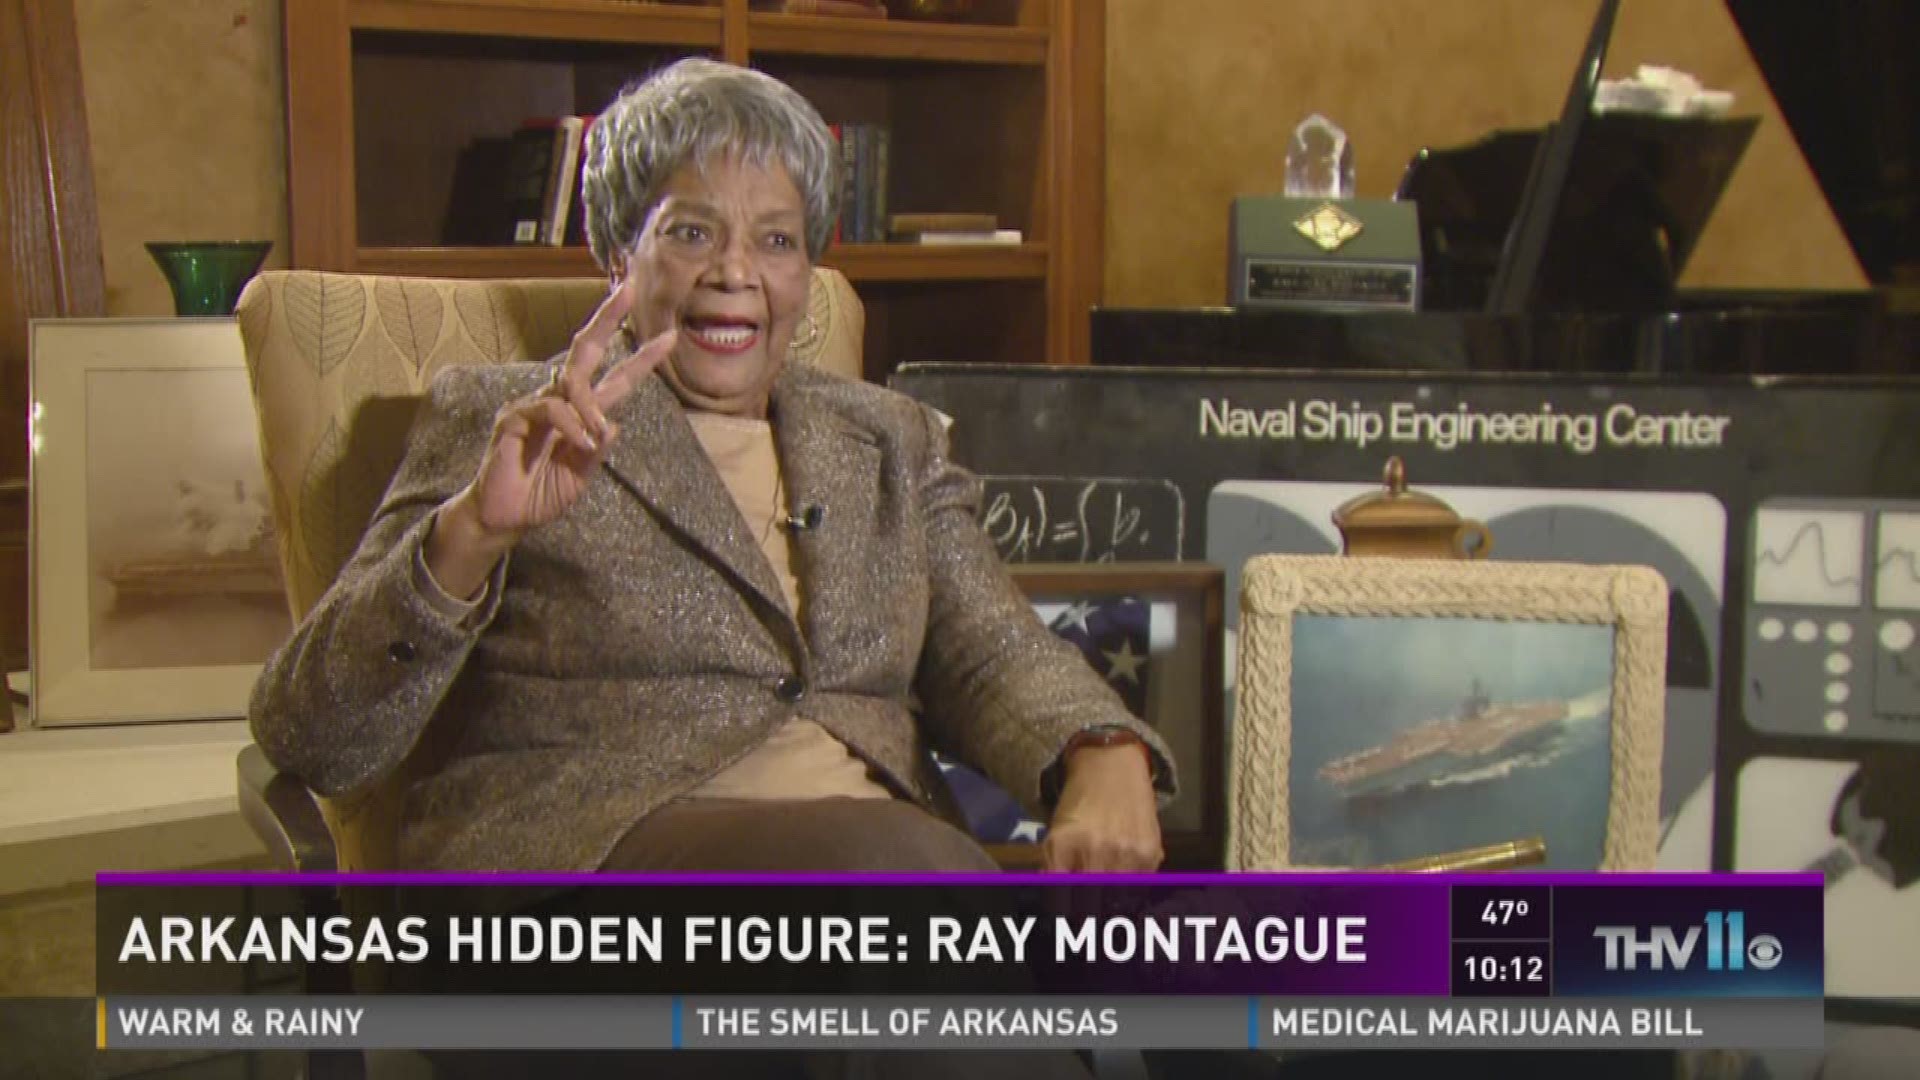 Raye Montague broke barriers during her time in the Navy